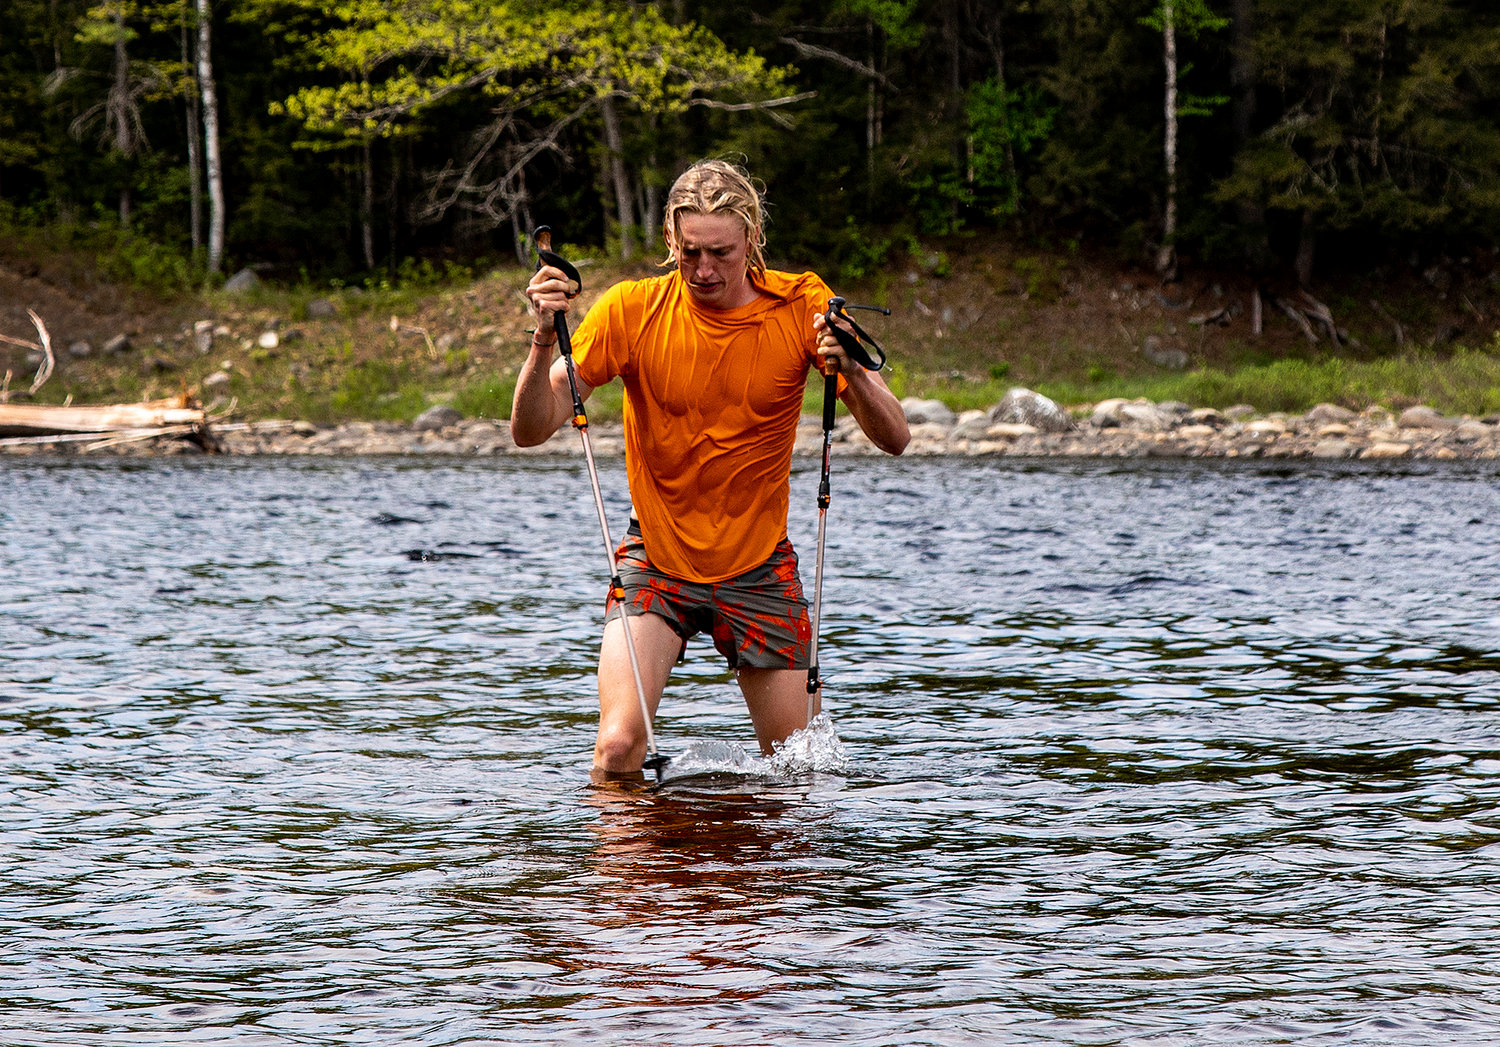 Jackson Parell of Florida emerges from the Kennebec River carrying his hiking poles after forgetting them on the other side of the river and having to swim back across to retrieve, along the Appalachian Trail on May 21, 2021, near Caratunk, Maine. (Gina Ferazzi/Los Angeles Times/TNS)